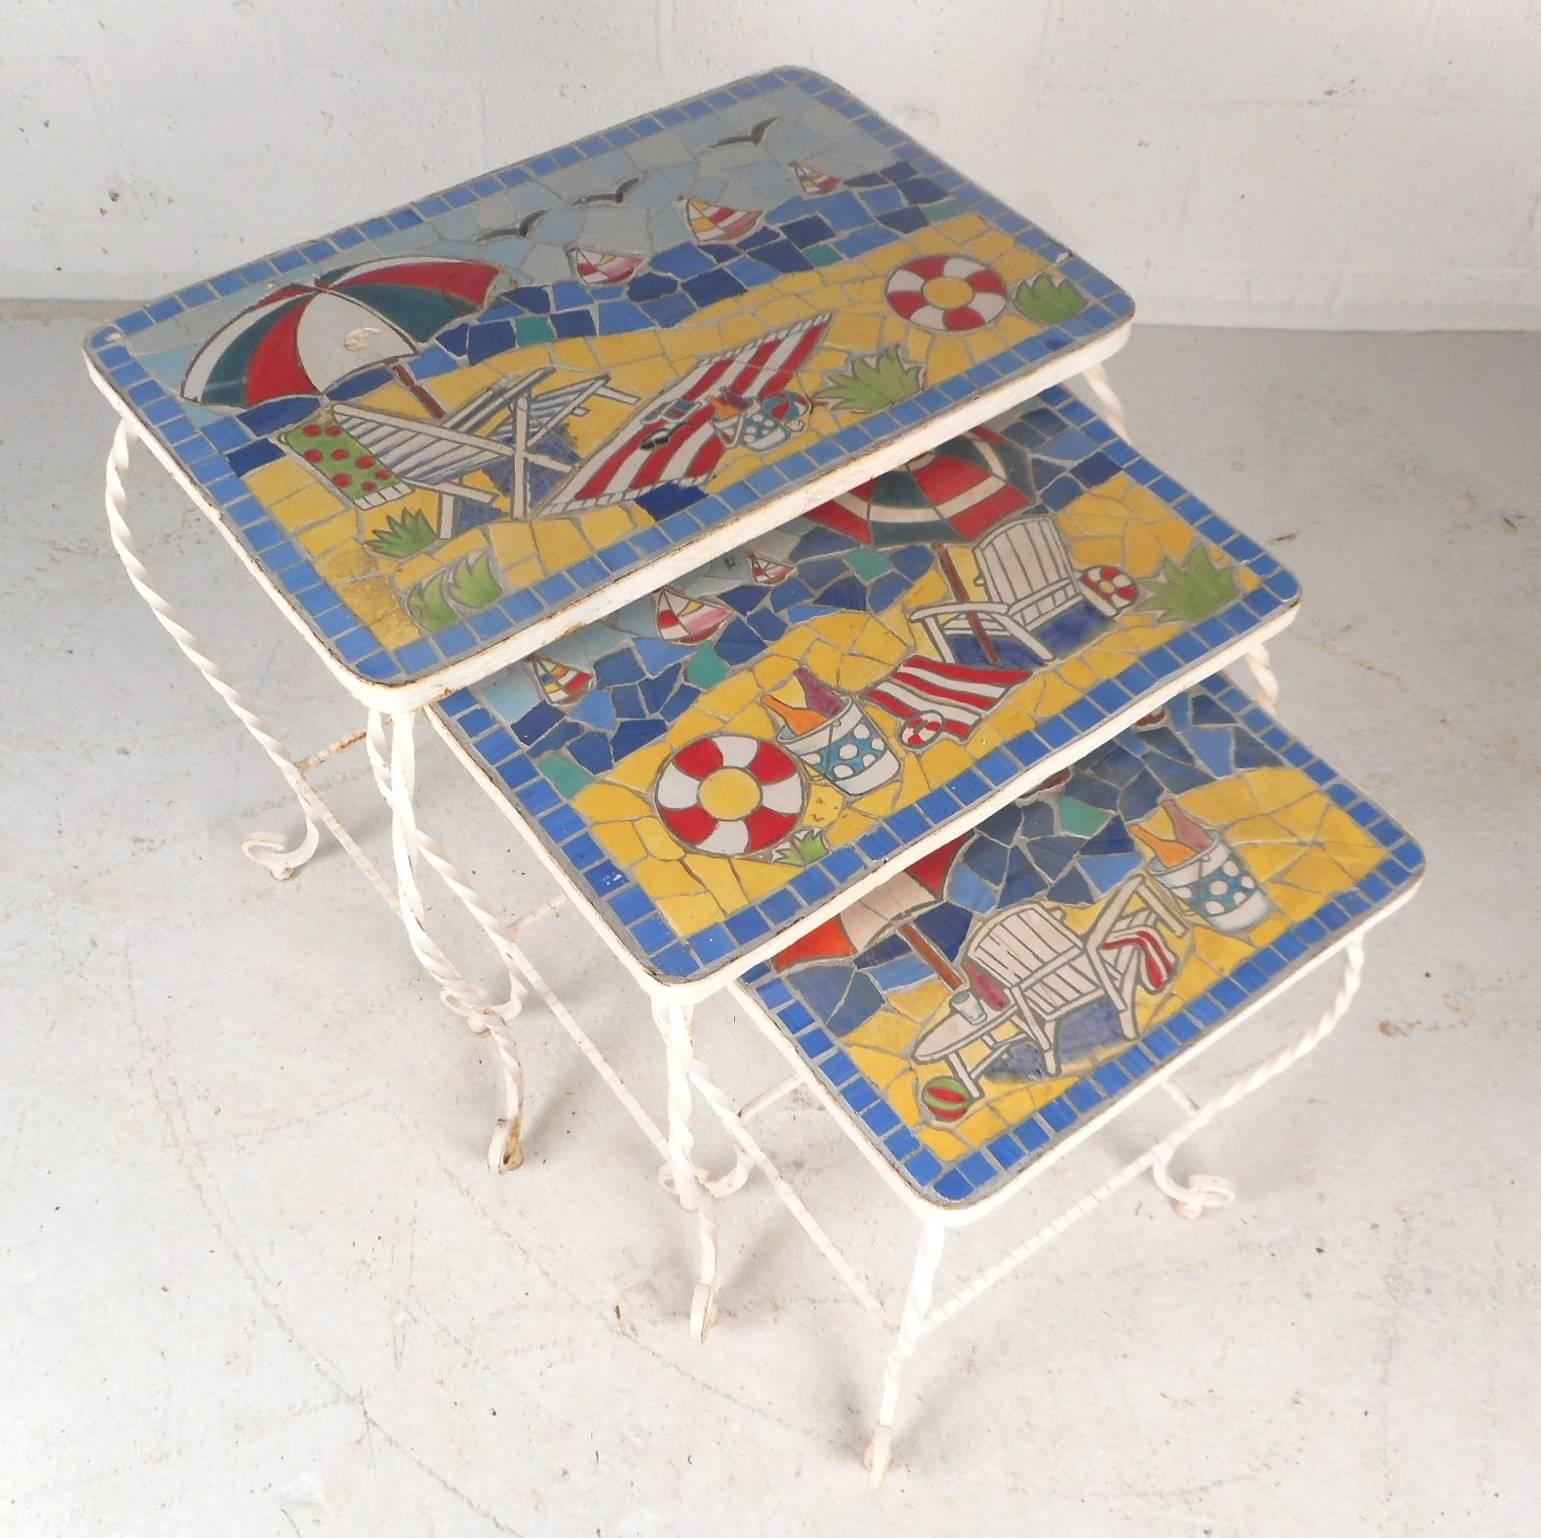 Beautiful Mid-Century Modern nesting tables with an elaborate colorful tile top displaying a fun day at the beach. Unique set features the ability to sit comfortably on top of one another for easy storage. Gorgeous imagery and heavy iron bases add